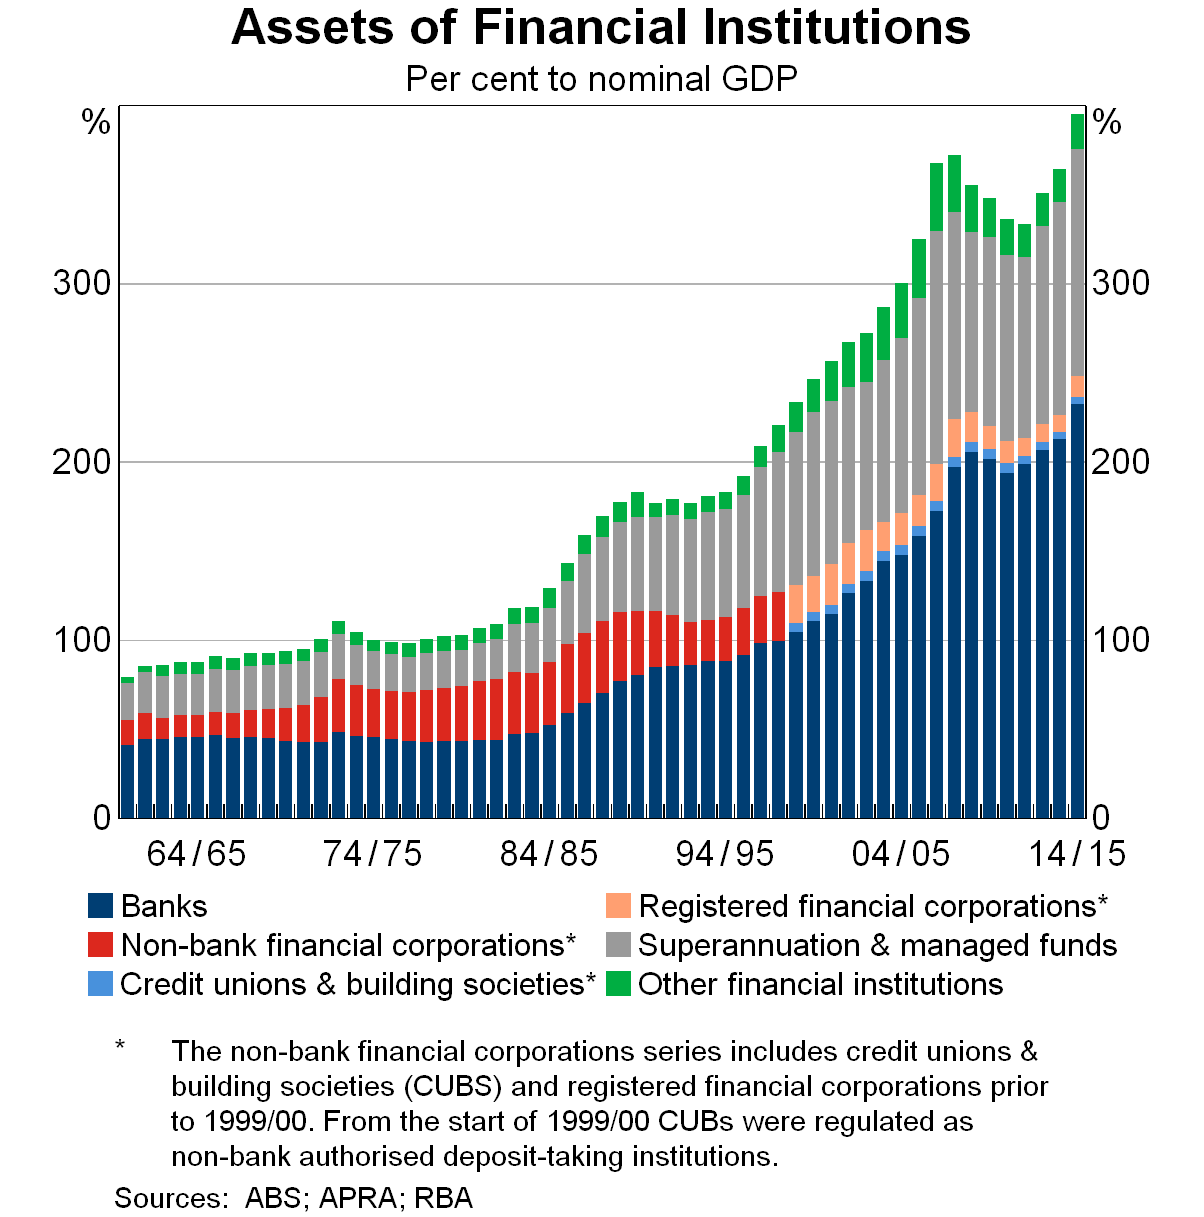 Assets of Financial Institutions